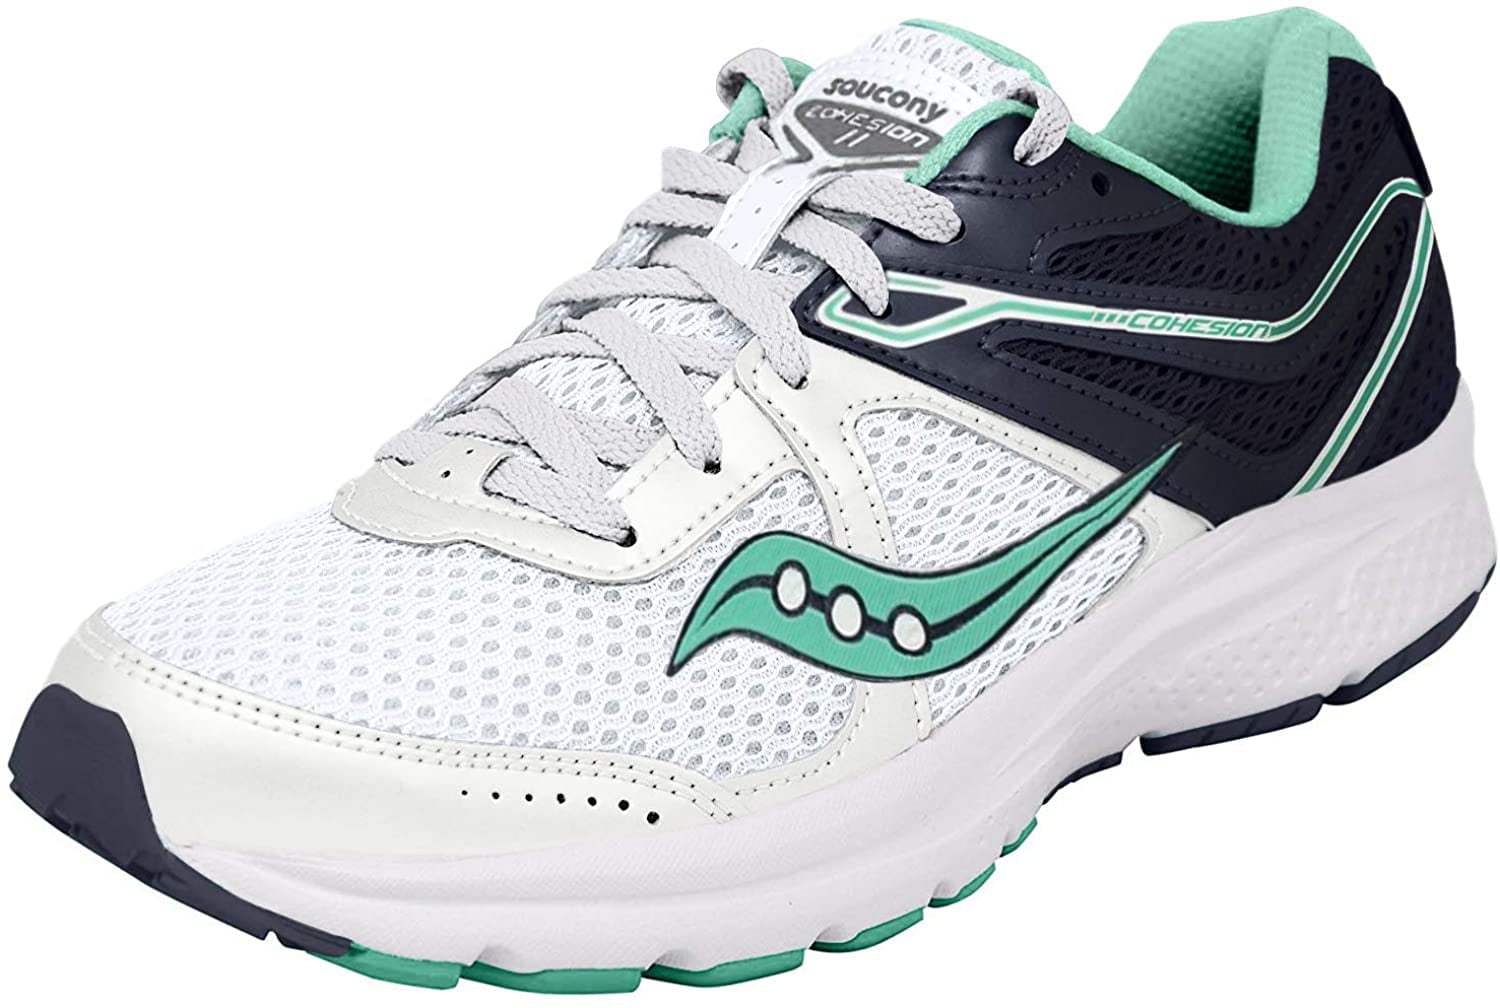 Cohesion 11 Running Shoe, White/Teal 